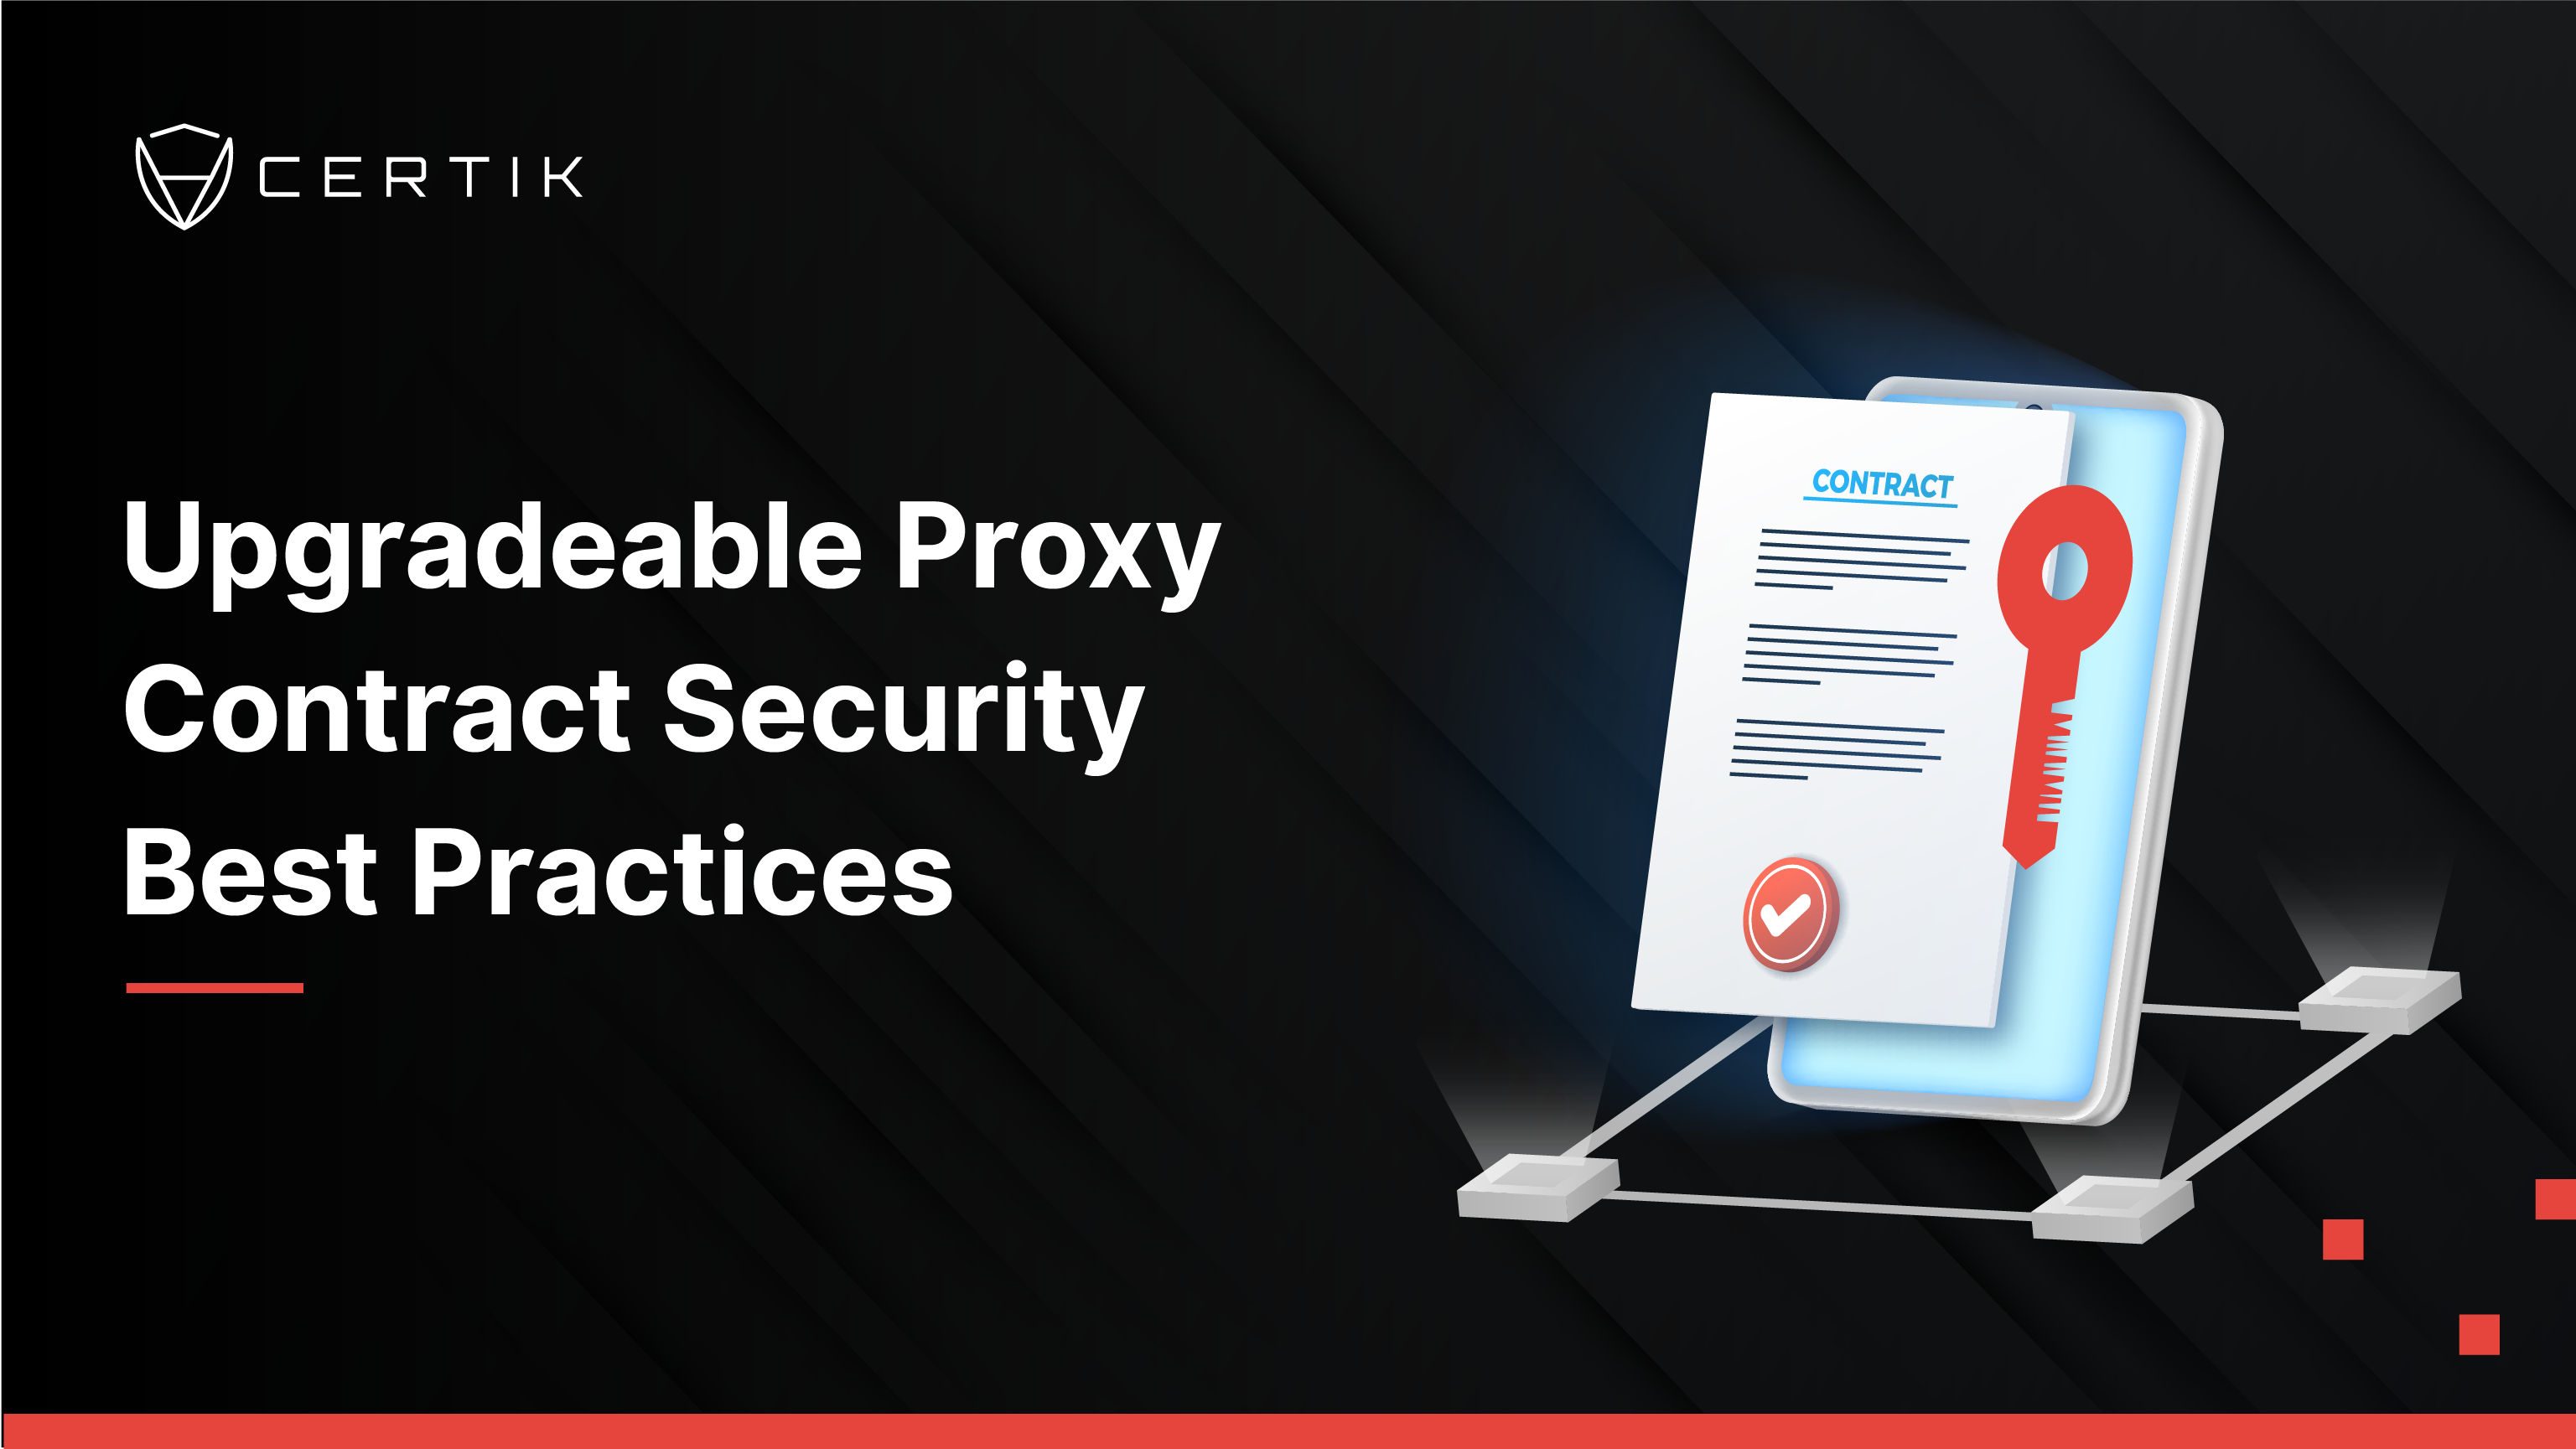 Upgradeable Proxy Contract Security Best Practices